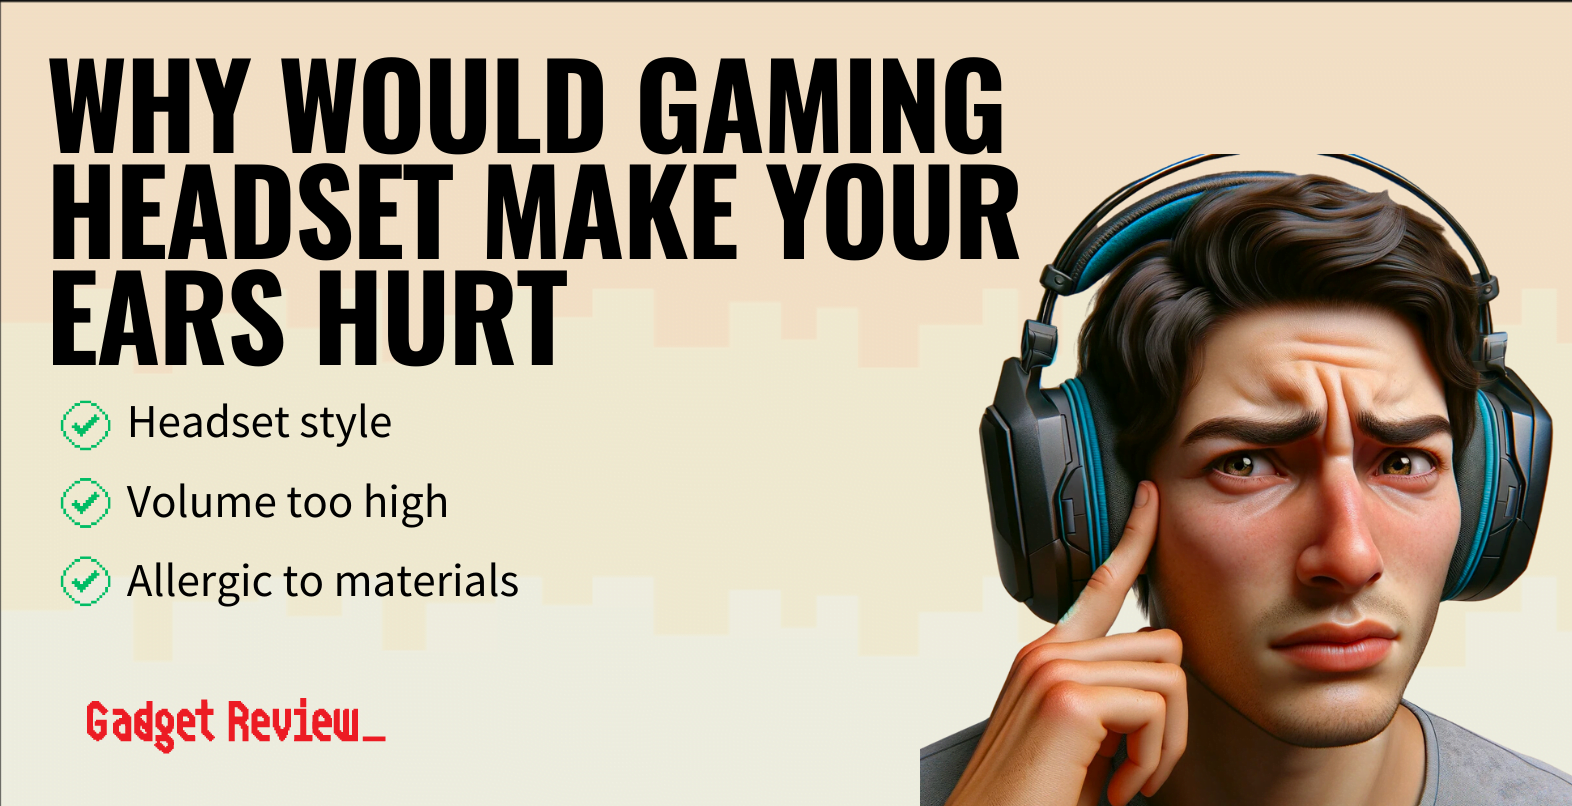 Why Would a Gaming Headset Make Your Ears Hurt?